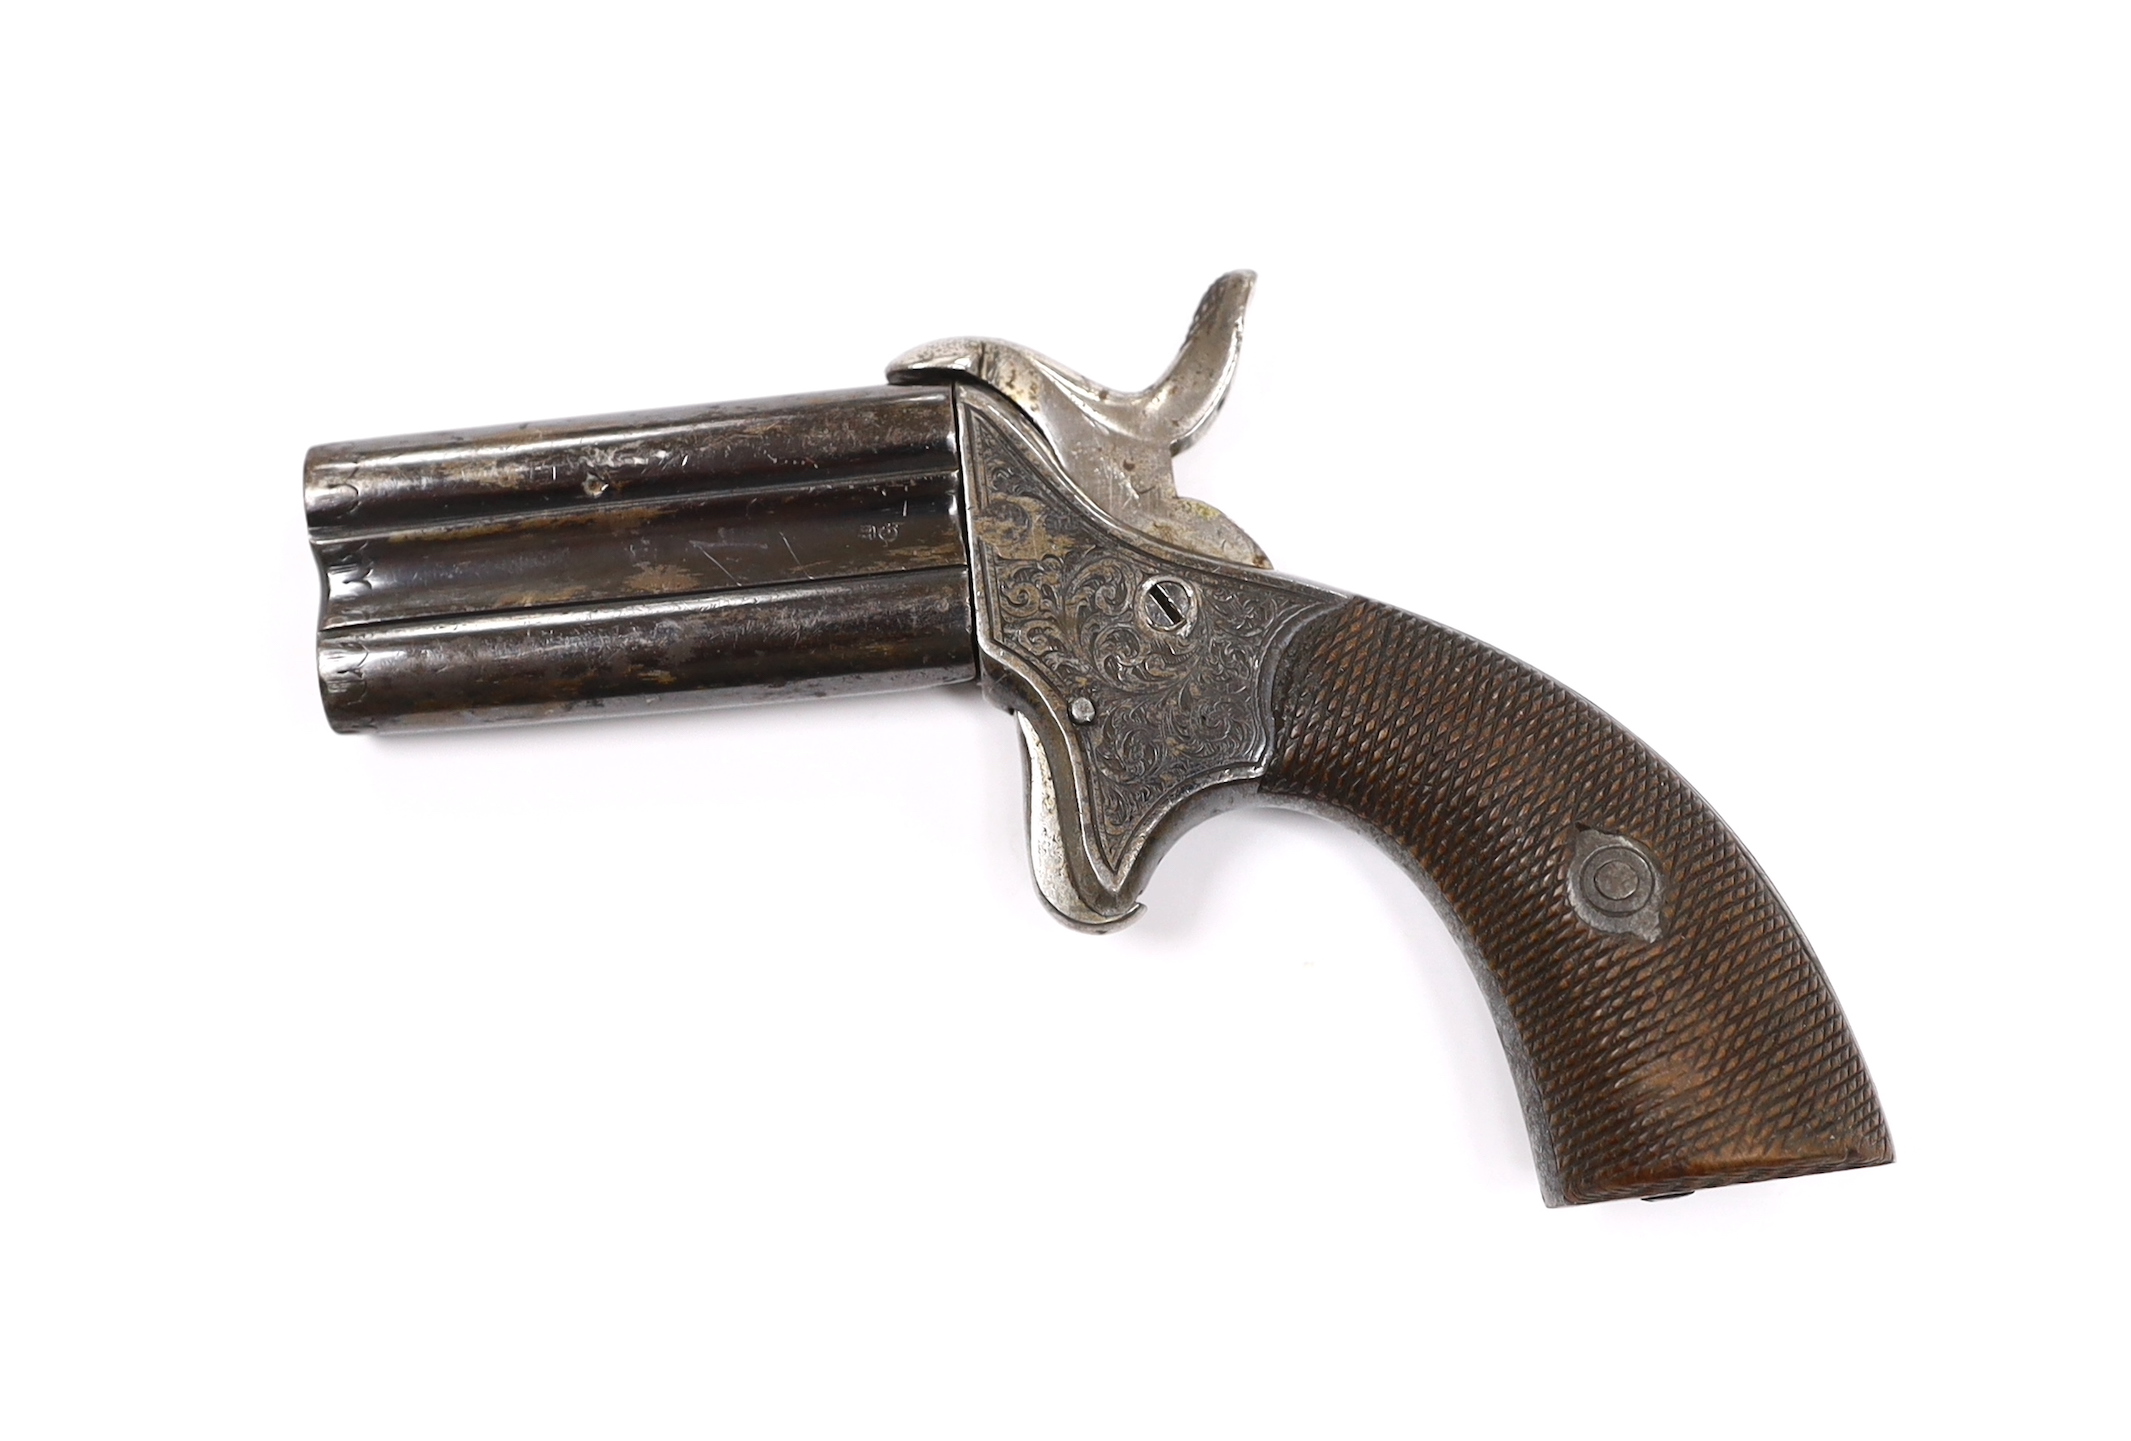 A Belgium mid 19th century double barrelled over-under pinfire muff pistol, stamped with Liege ELG proof mark, barrels 5.5cm